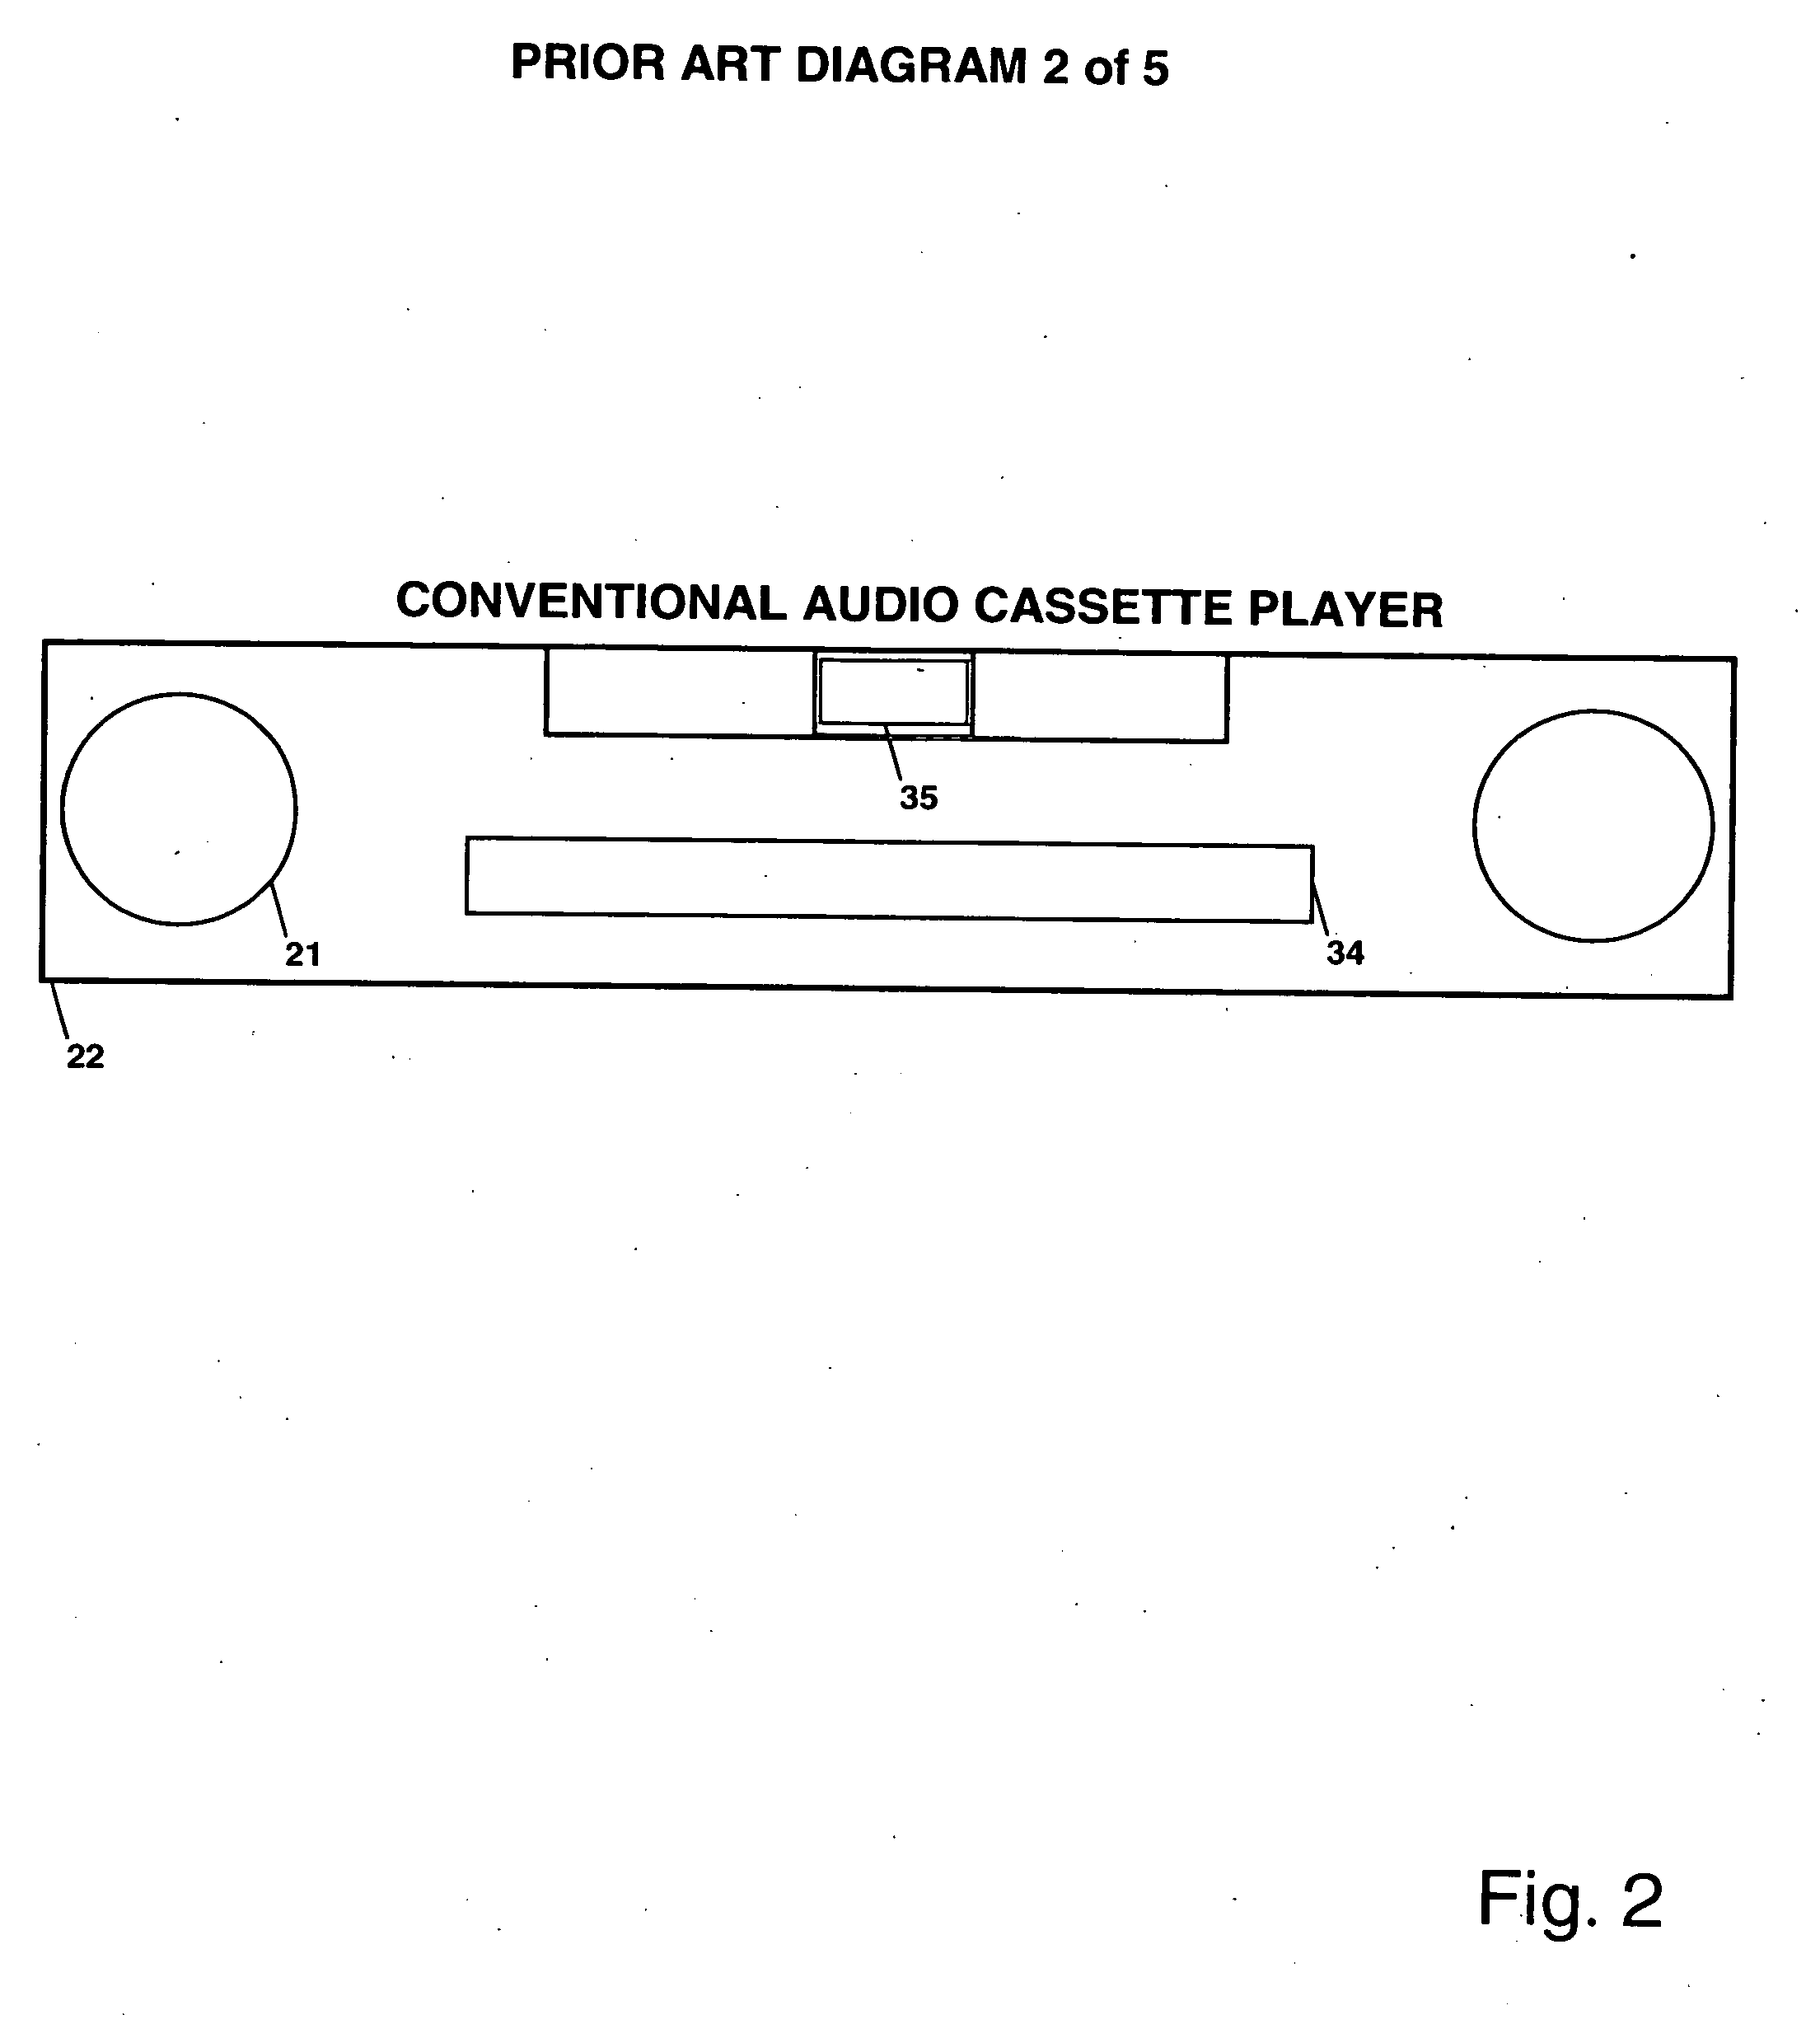 Cellular phone in form factor of a conventional audio cassette